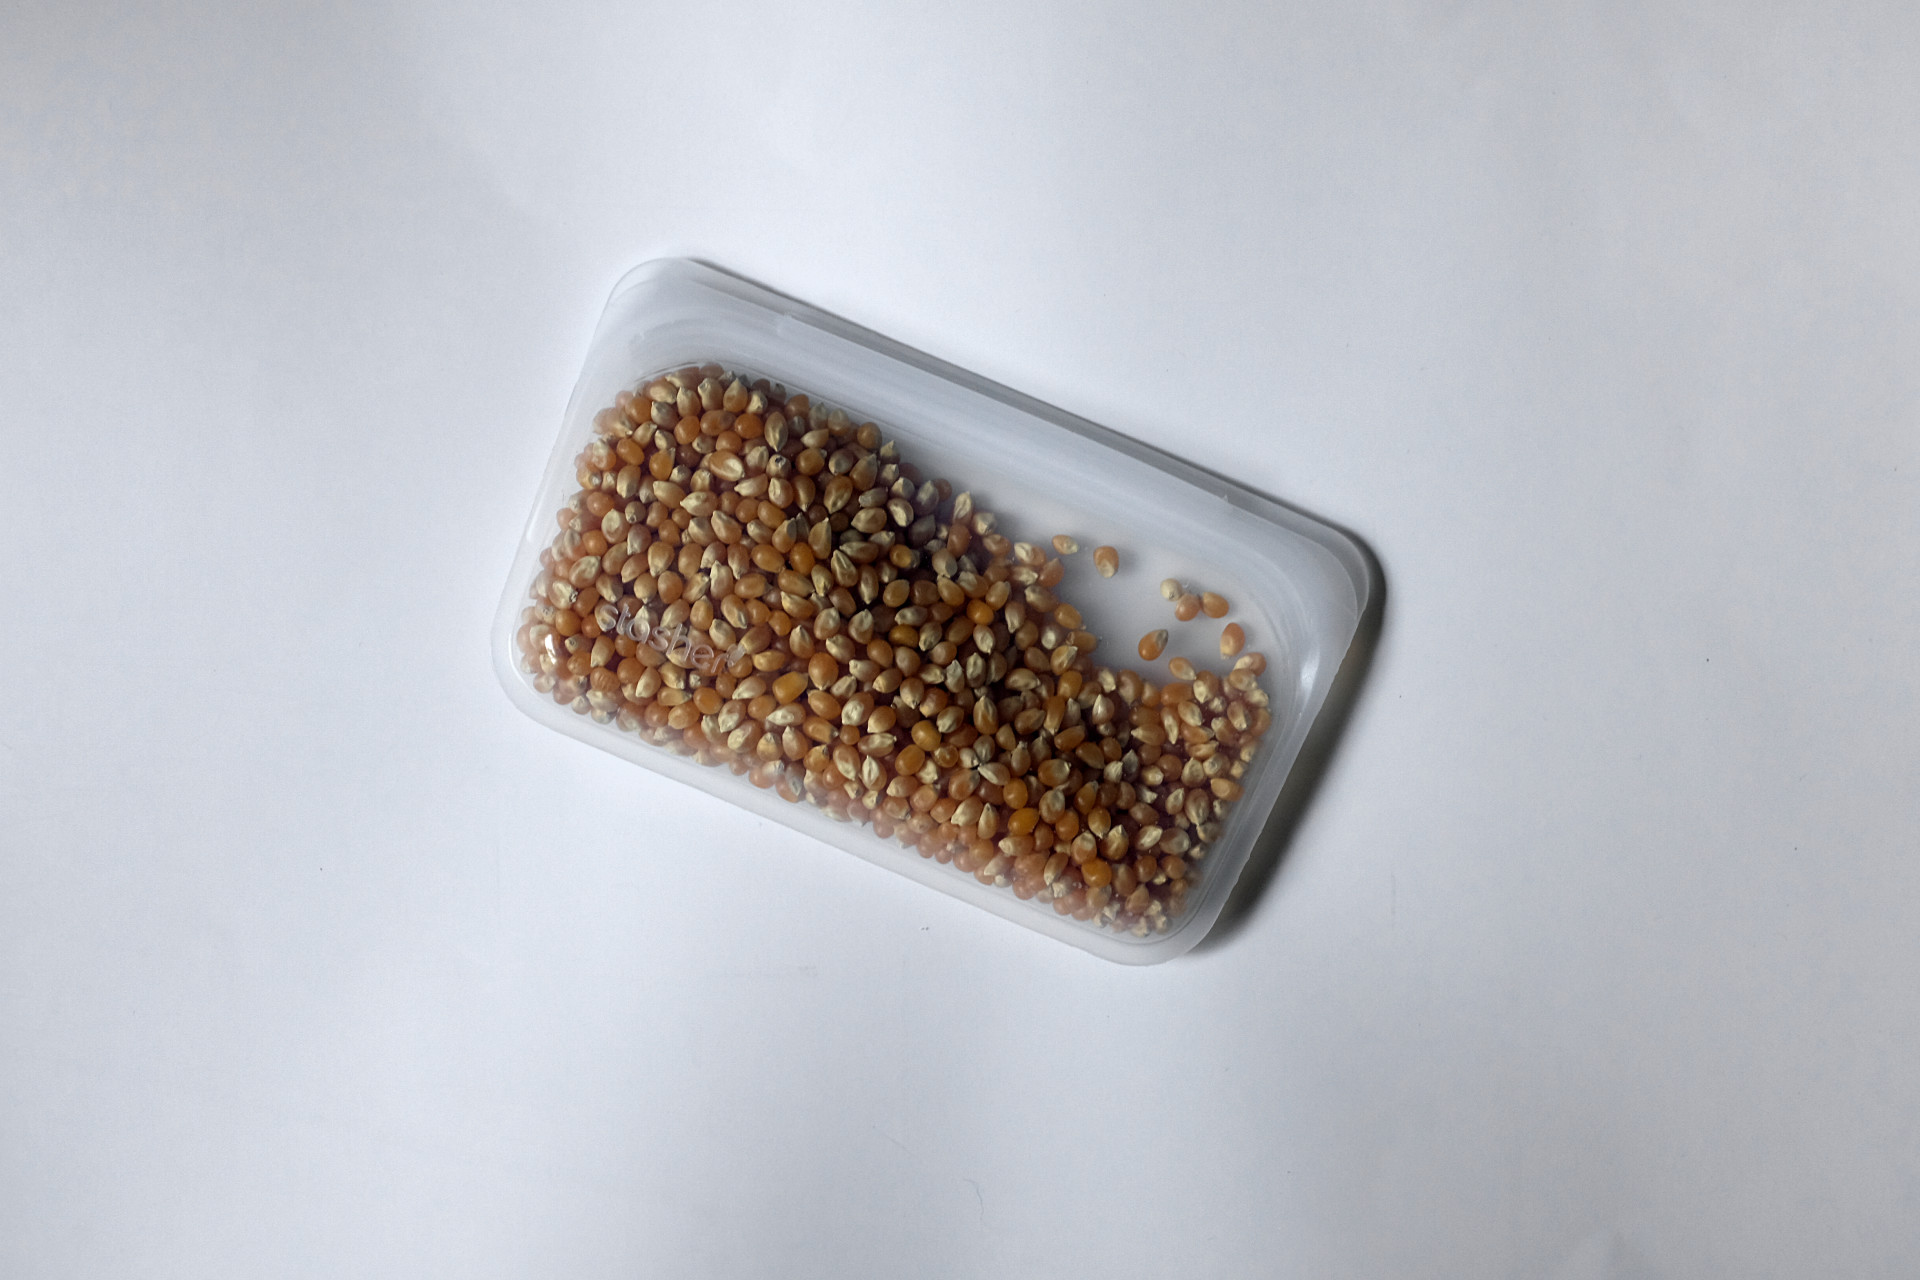 A snack-sized Stasher bag holds popcorn kernels on a white surface